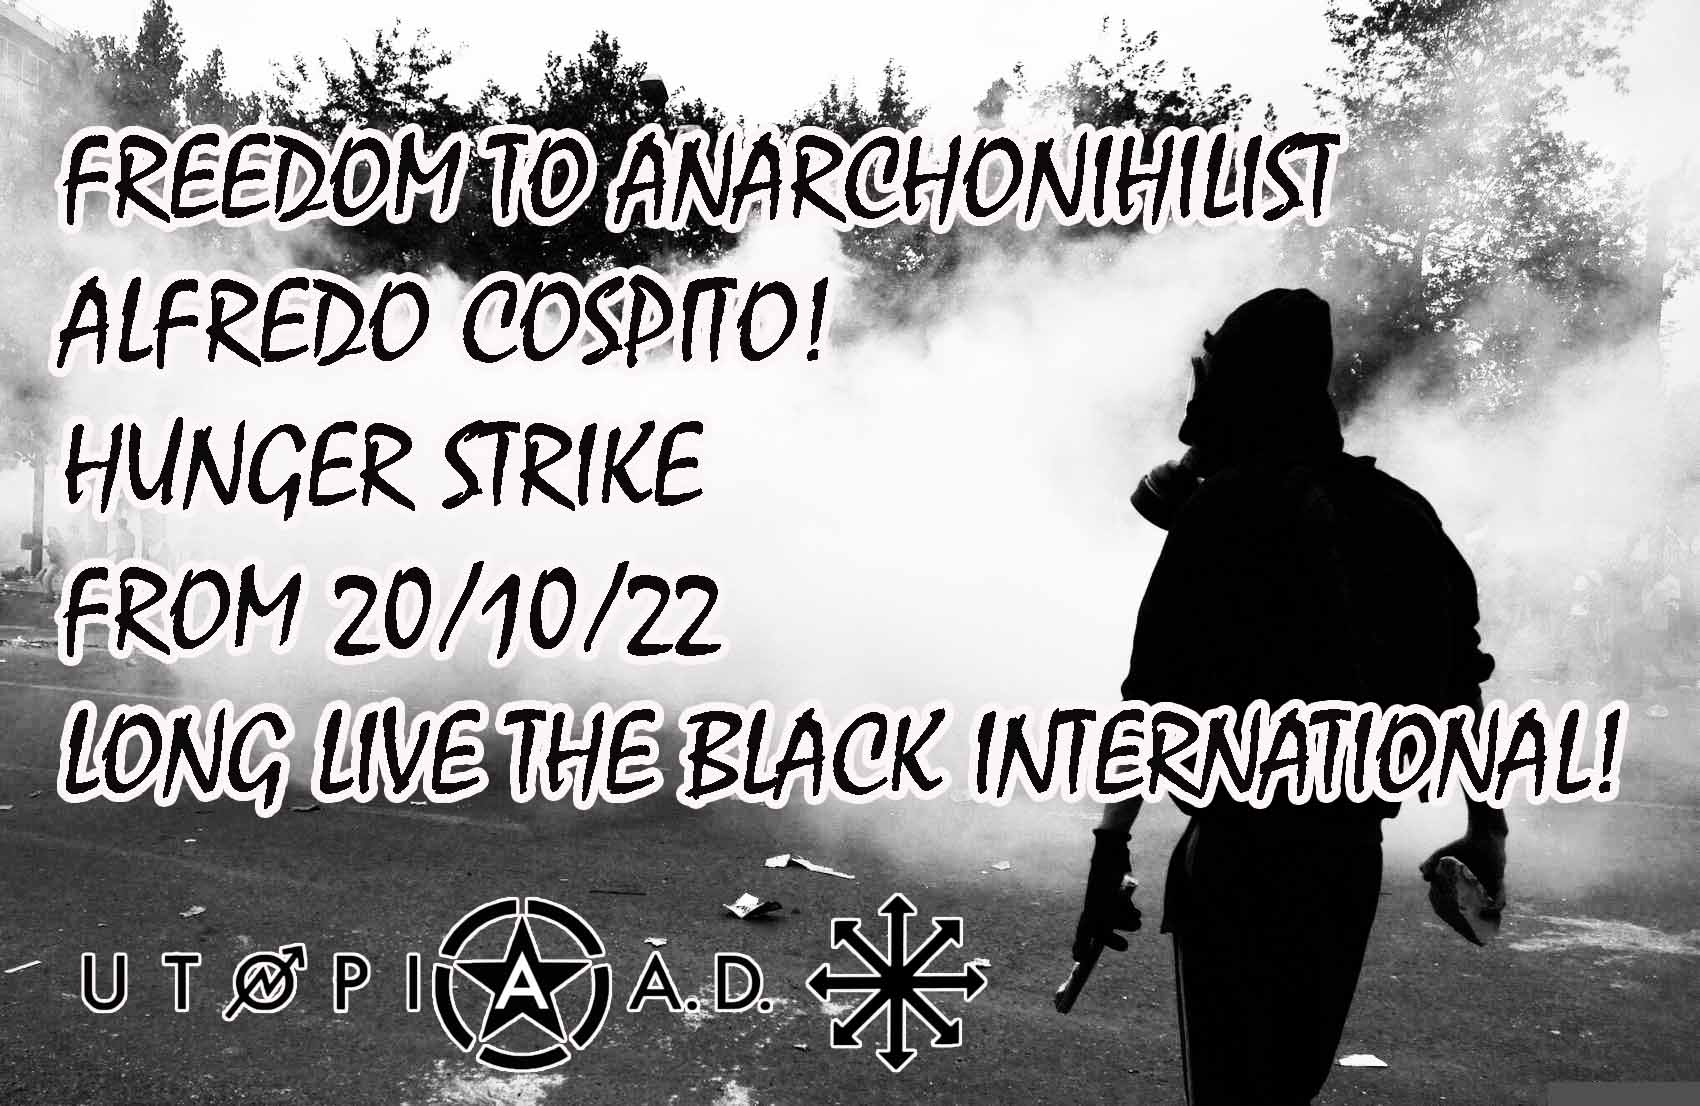 Grecia: Call for cathering in solidarity with the anarcho-nihilist Alfredo Cospito who is on hunger strike from 20/10/2022